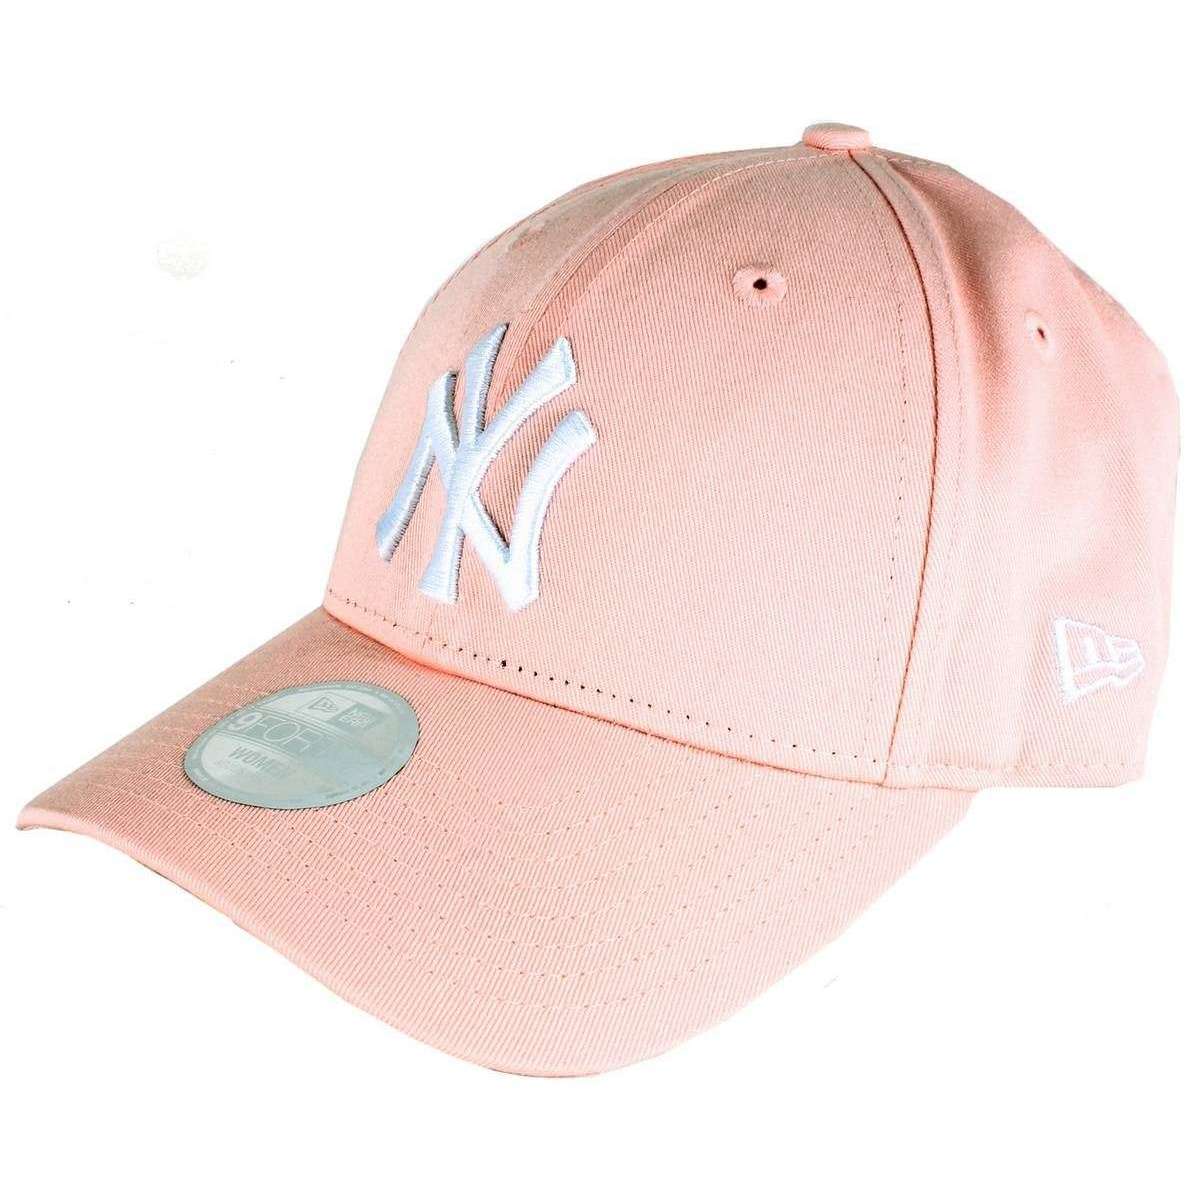 New Era 9FORTY League Essential New York Yankees Cap - Pink/White